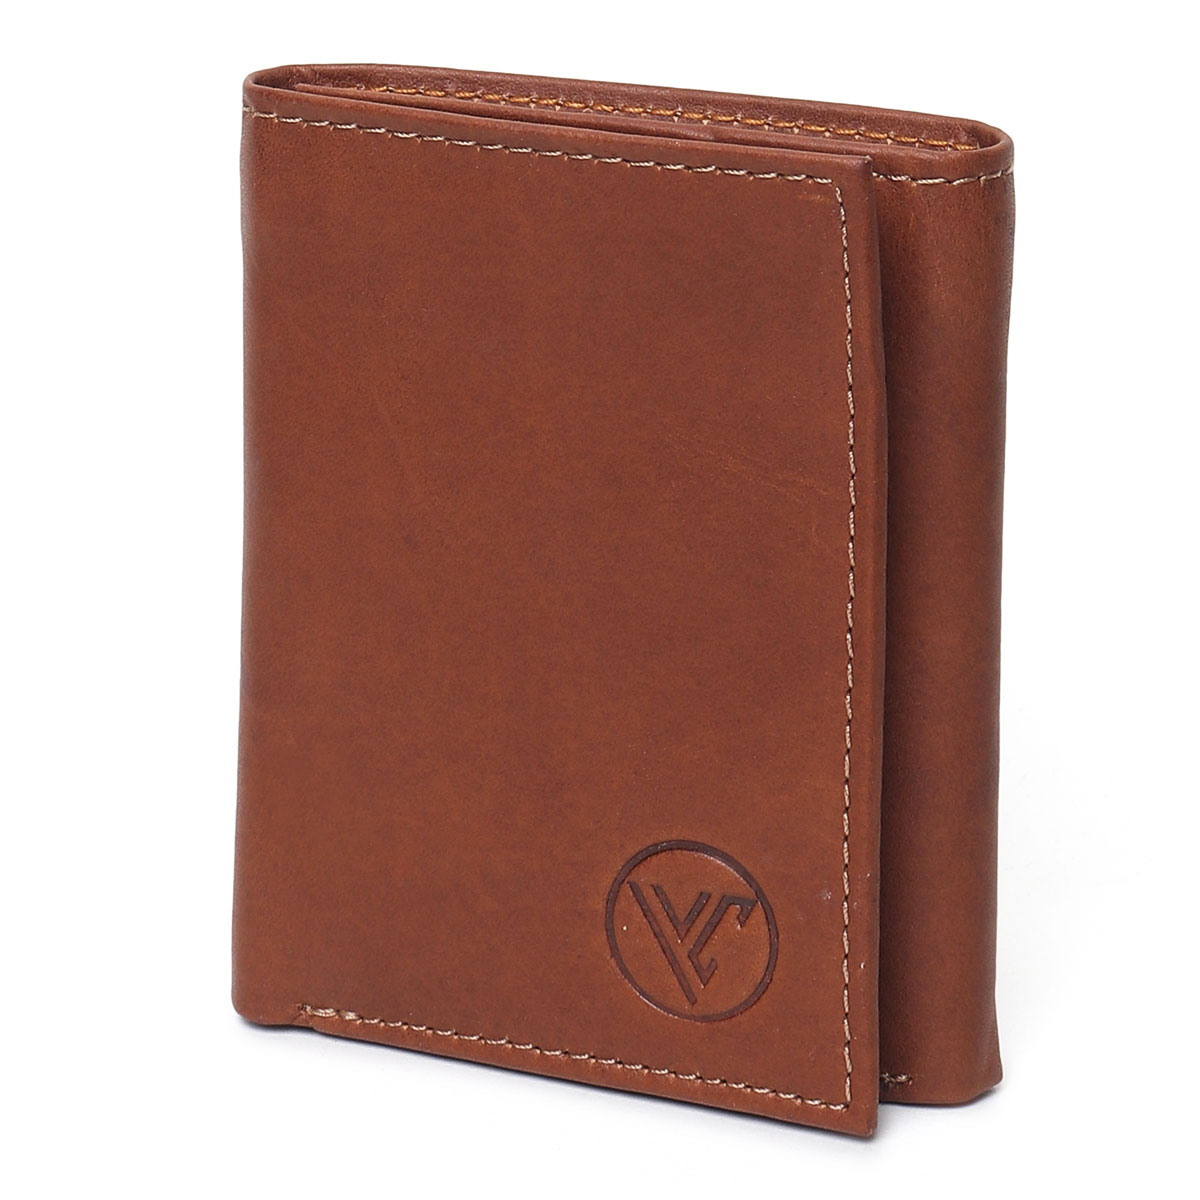 Tri Fold Leather Wallet for Men Crunch Brown – Genuine Leather